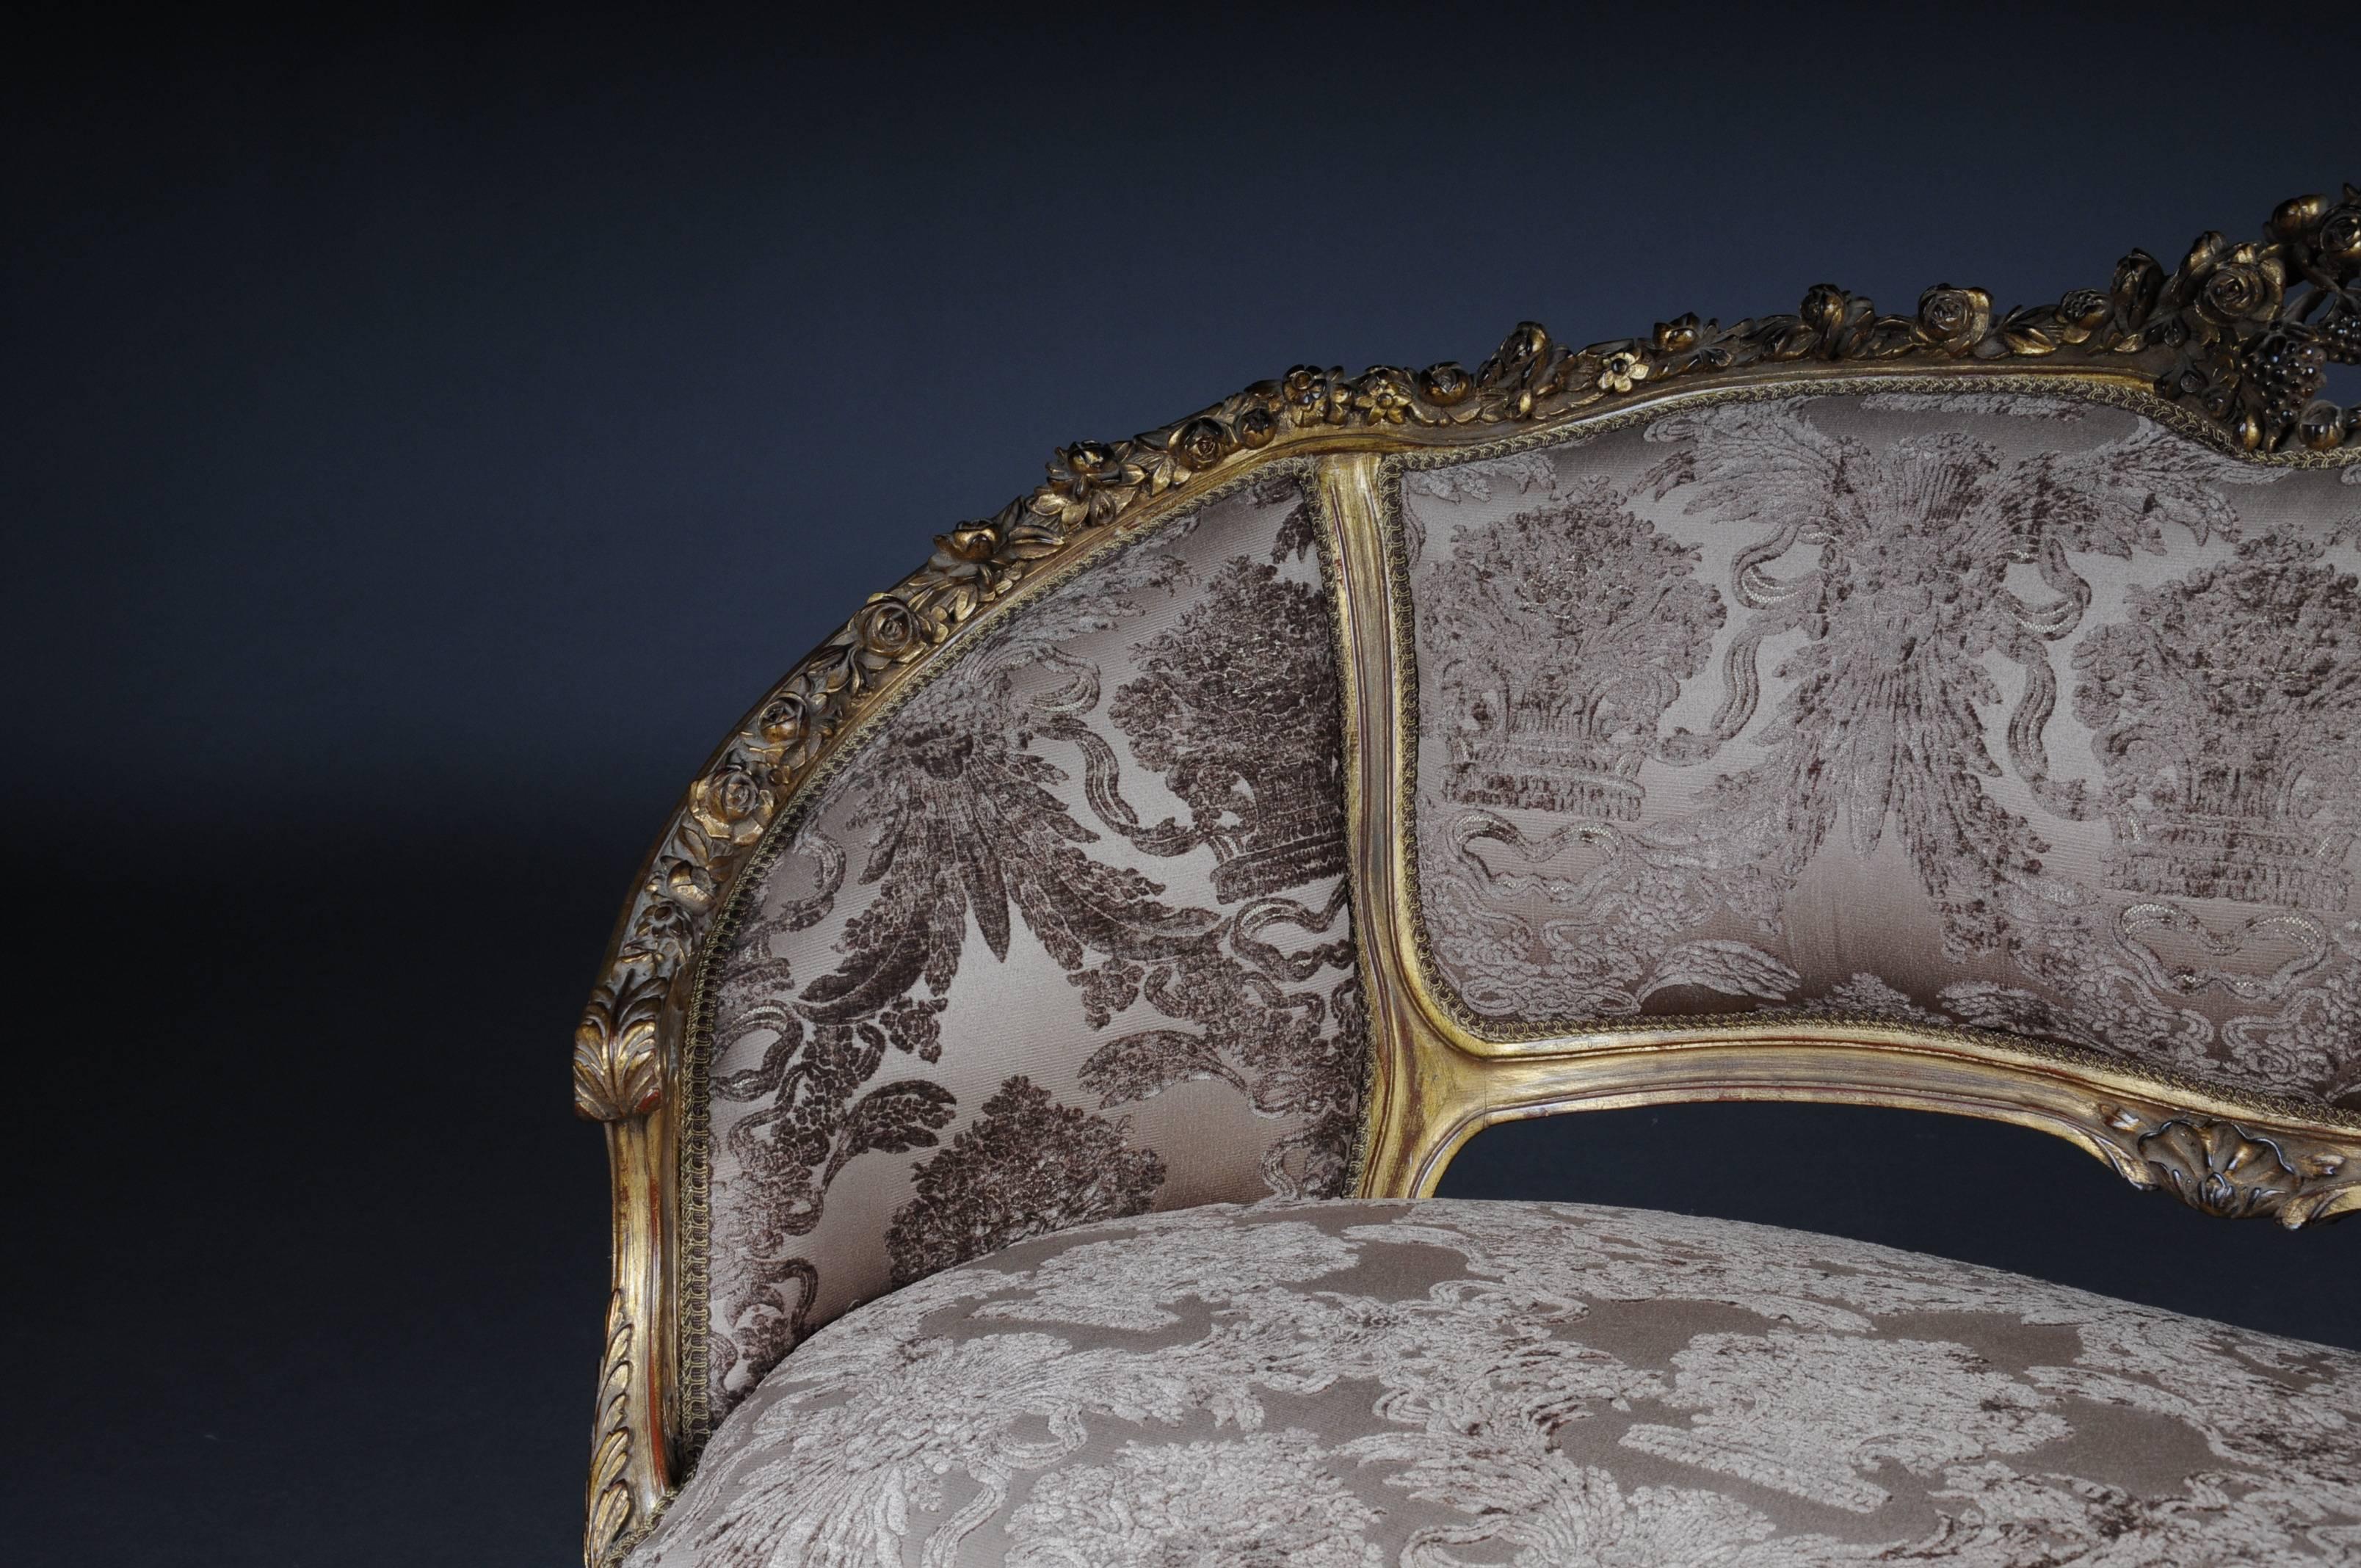 Beech Decorative French Sofa, Canapé in Louis XVI Seize For Sale